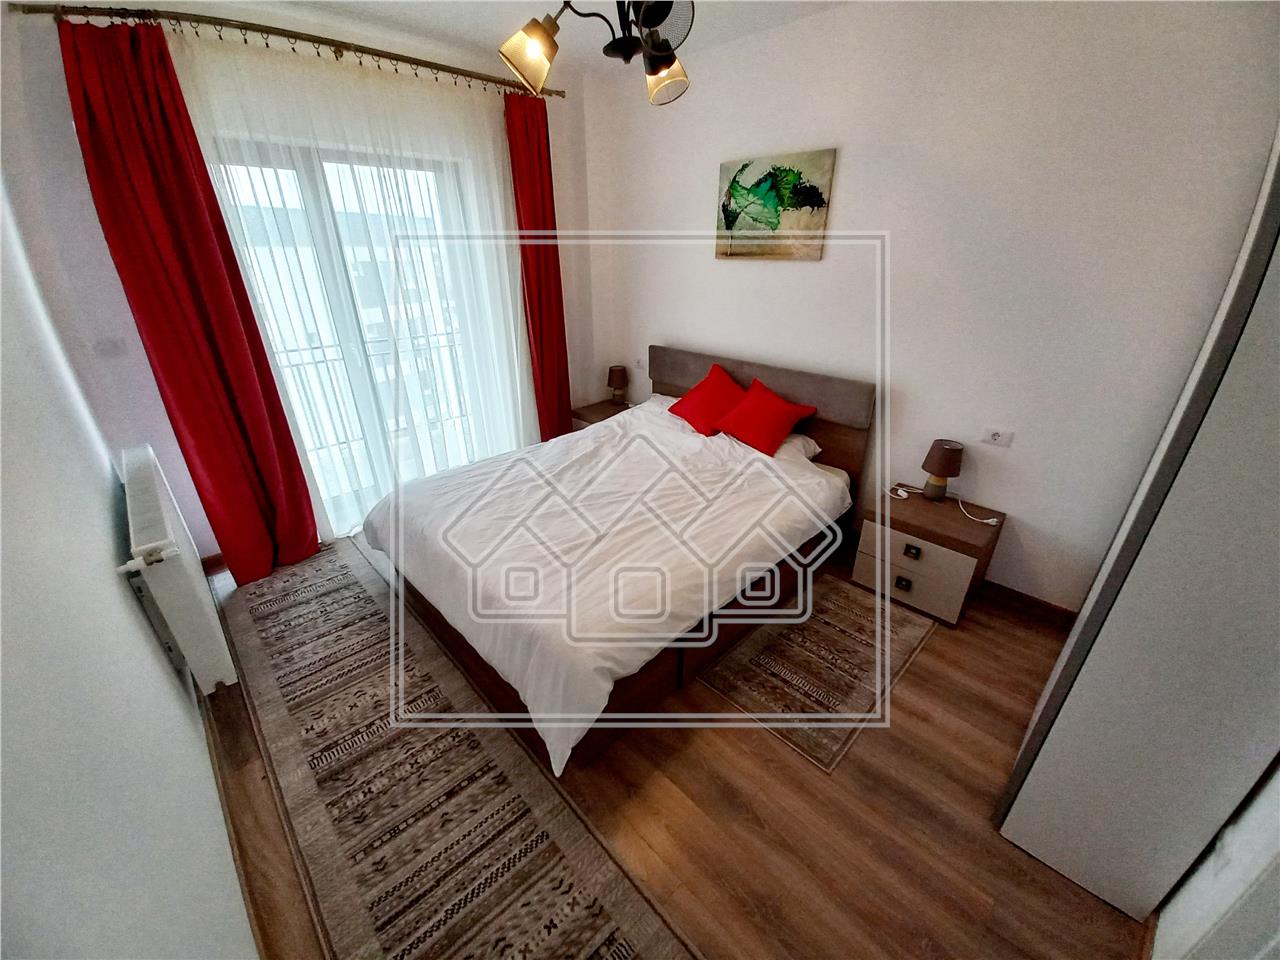 Apartment for rent in Alba Iulia - 2 rooms - balcony - parking space